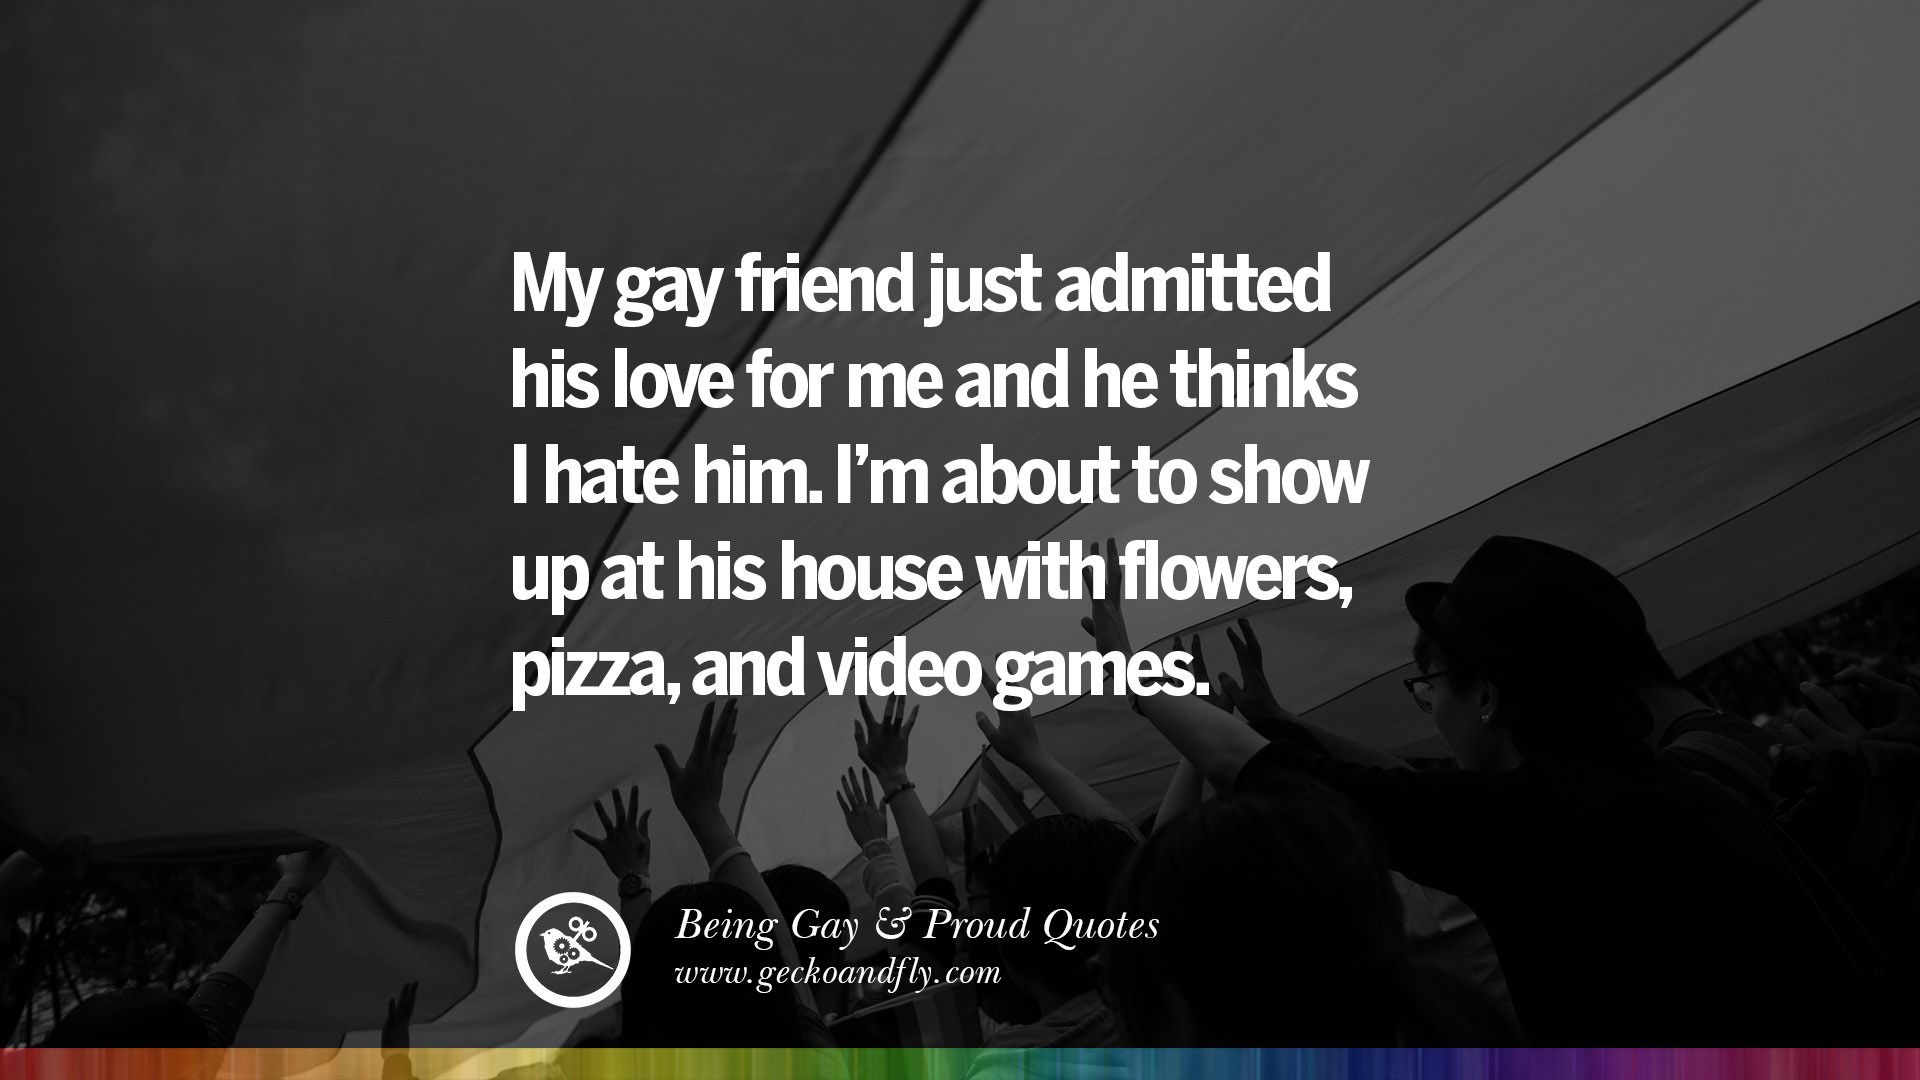 Quotes About Gay Pride, Pro LGBT, Homophobia and Marriage